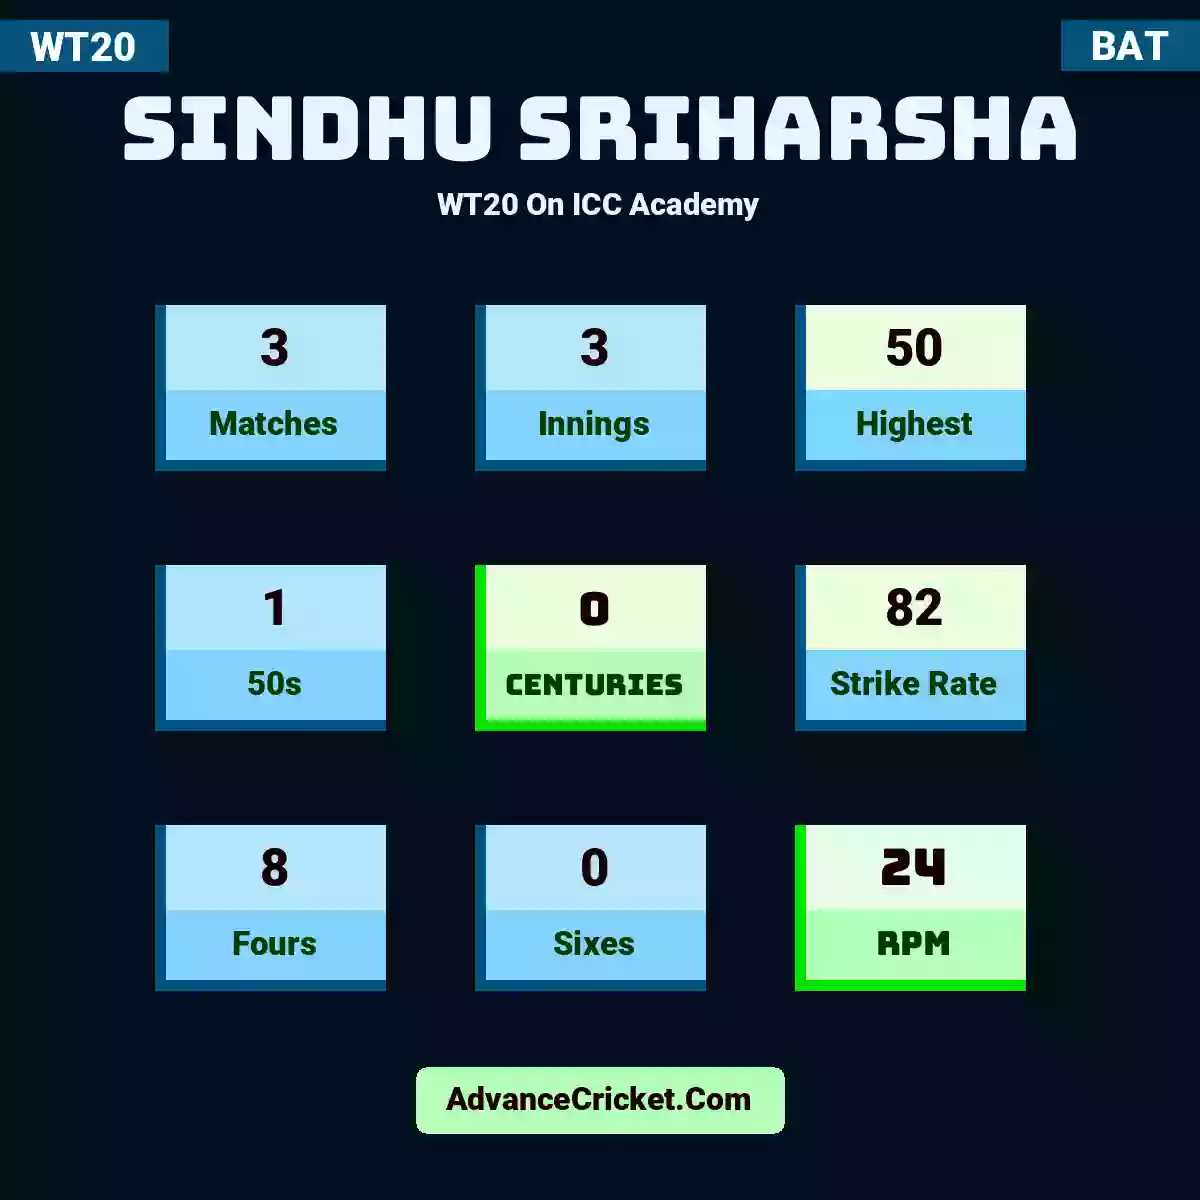 Sindhu Sriharsha WT20  On ICC Academy, Sindhu Sriharsha played 3 matches, scored 50 runs as highest, 1 half-centuries, and 0 centuries, with a strike rate of 82. S.Sriharsha hit 8 fours and 0 sixes, with an RPM of 24.